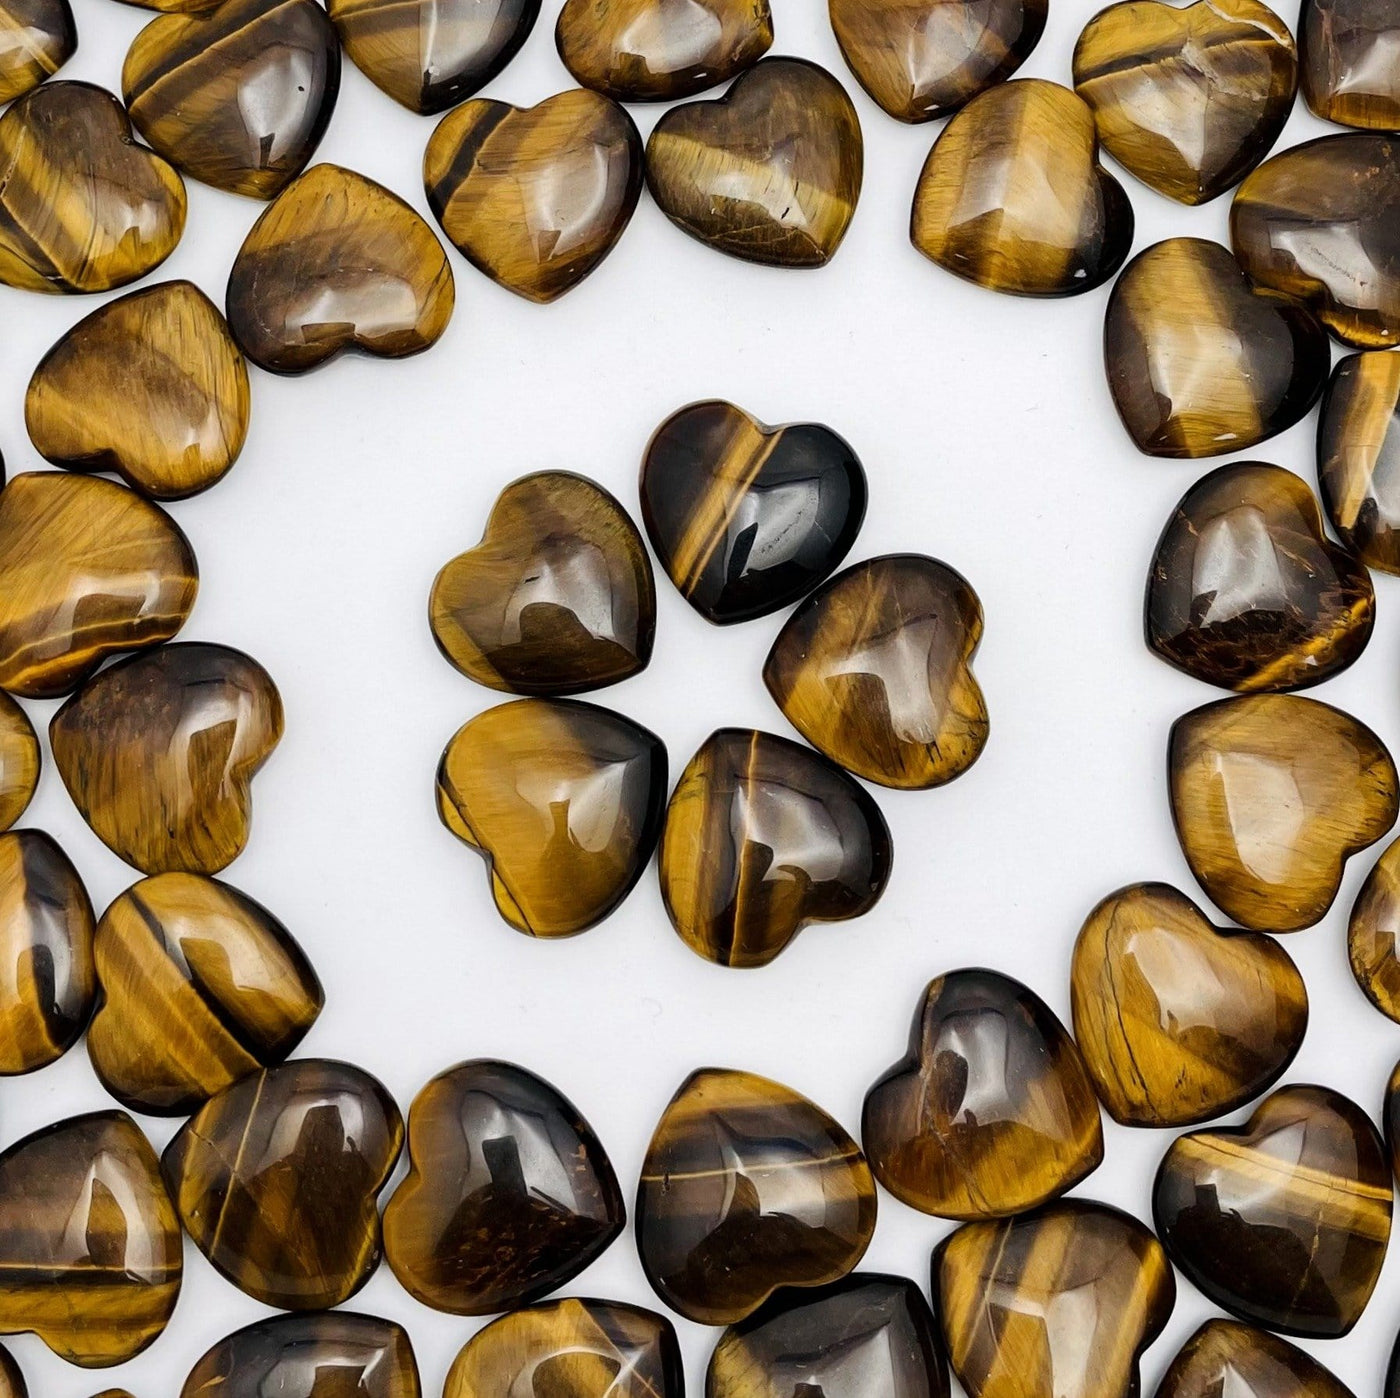 Many tiger eye hearts are shown on the background